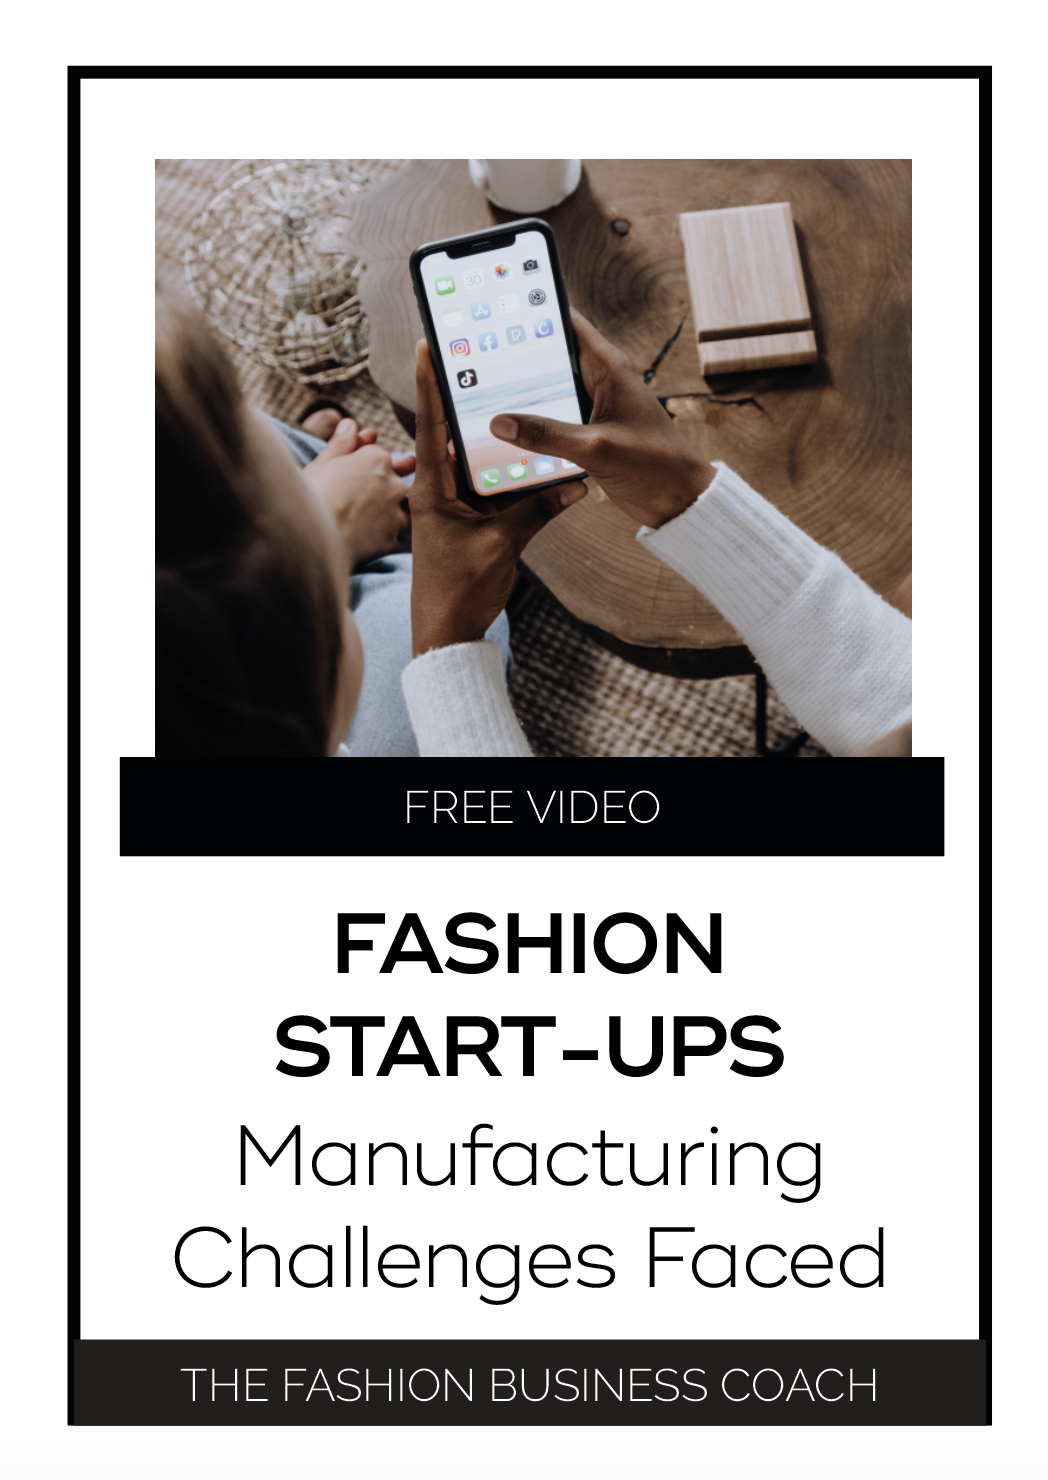 Fashion Start-ups - Manufacturing Challenges Faced 2.png